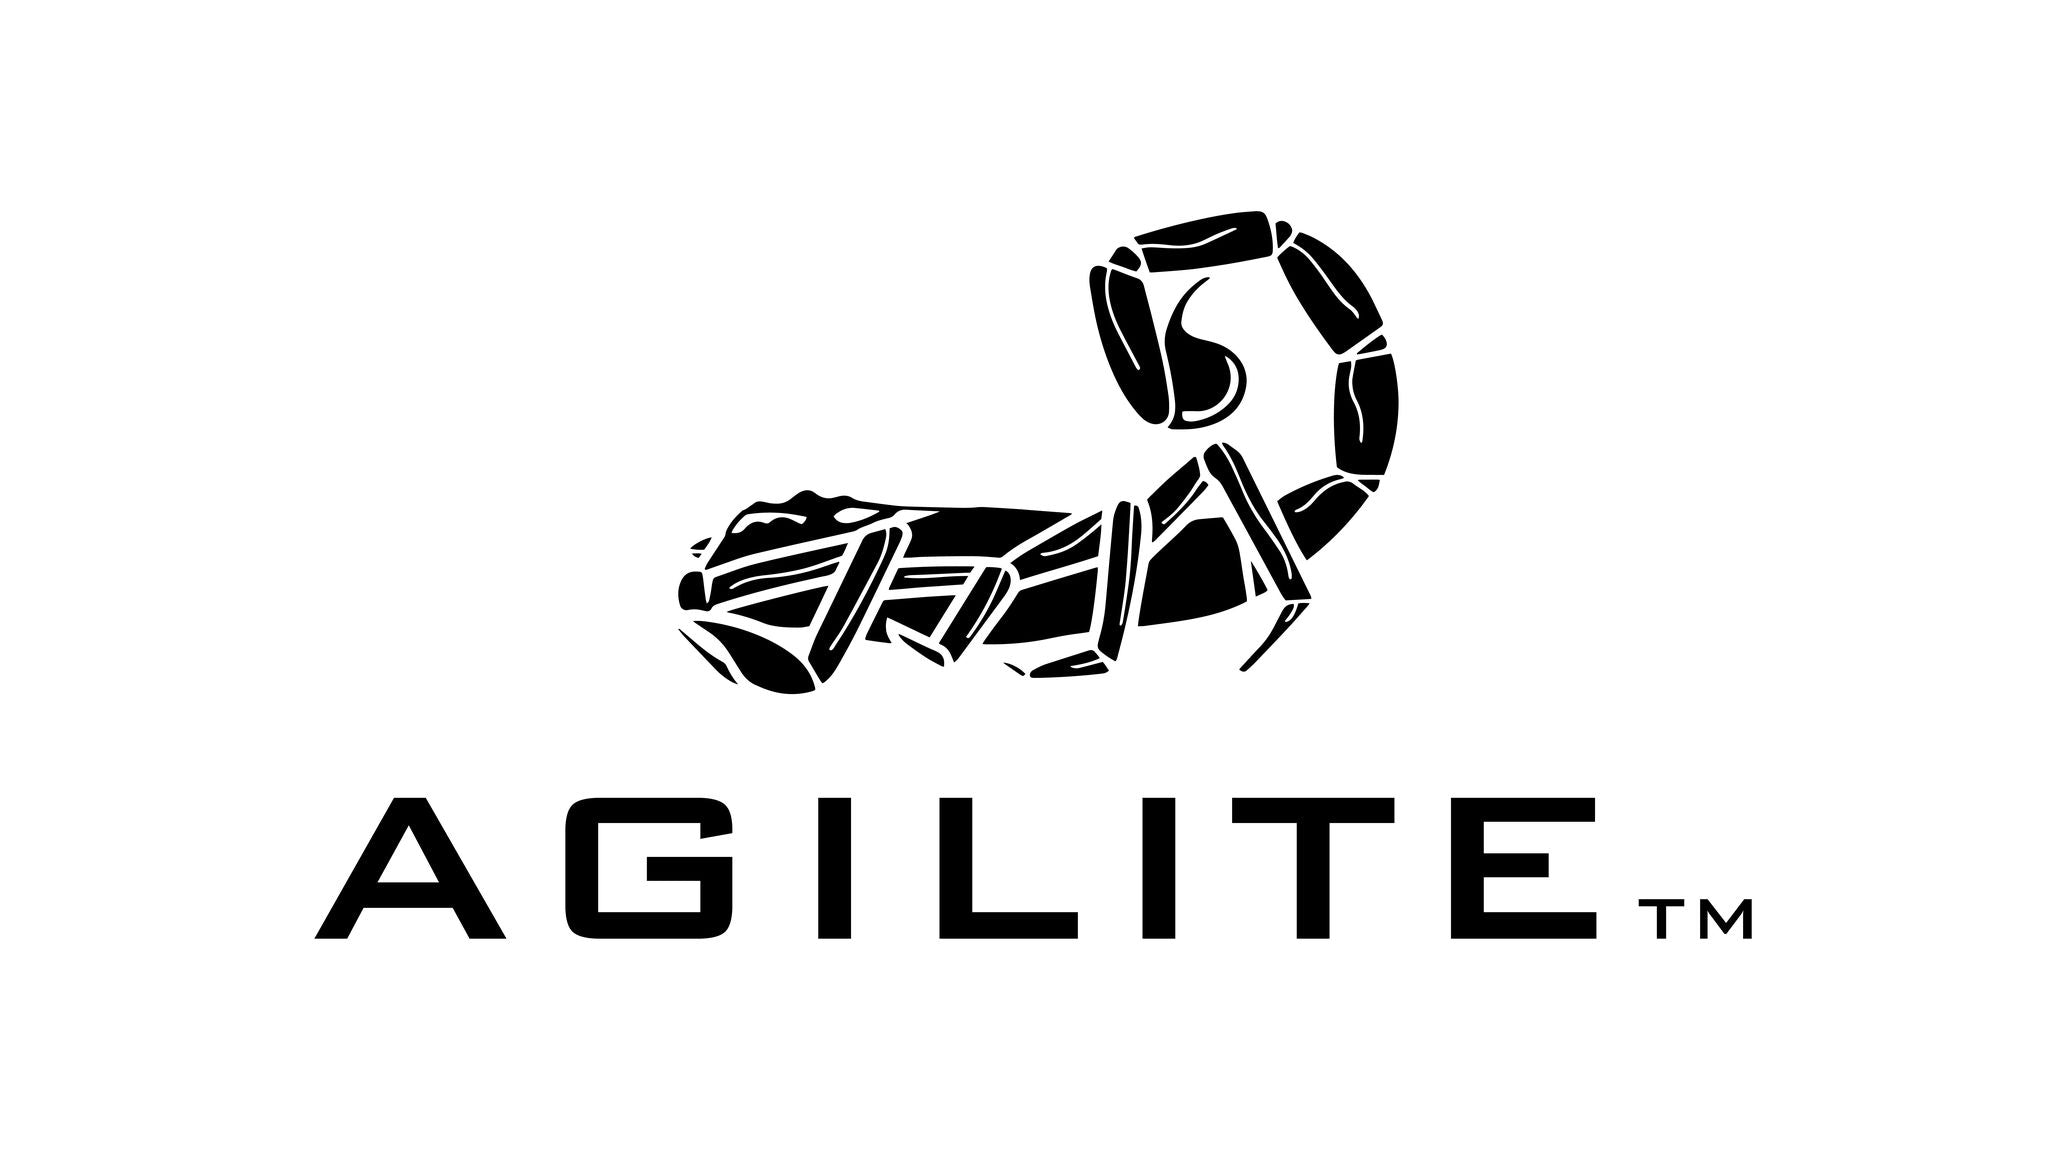 About Agilite